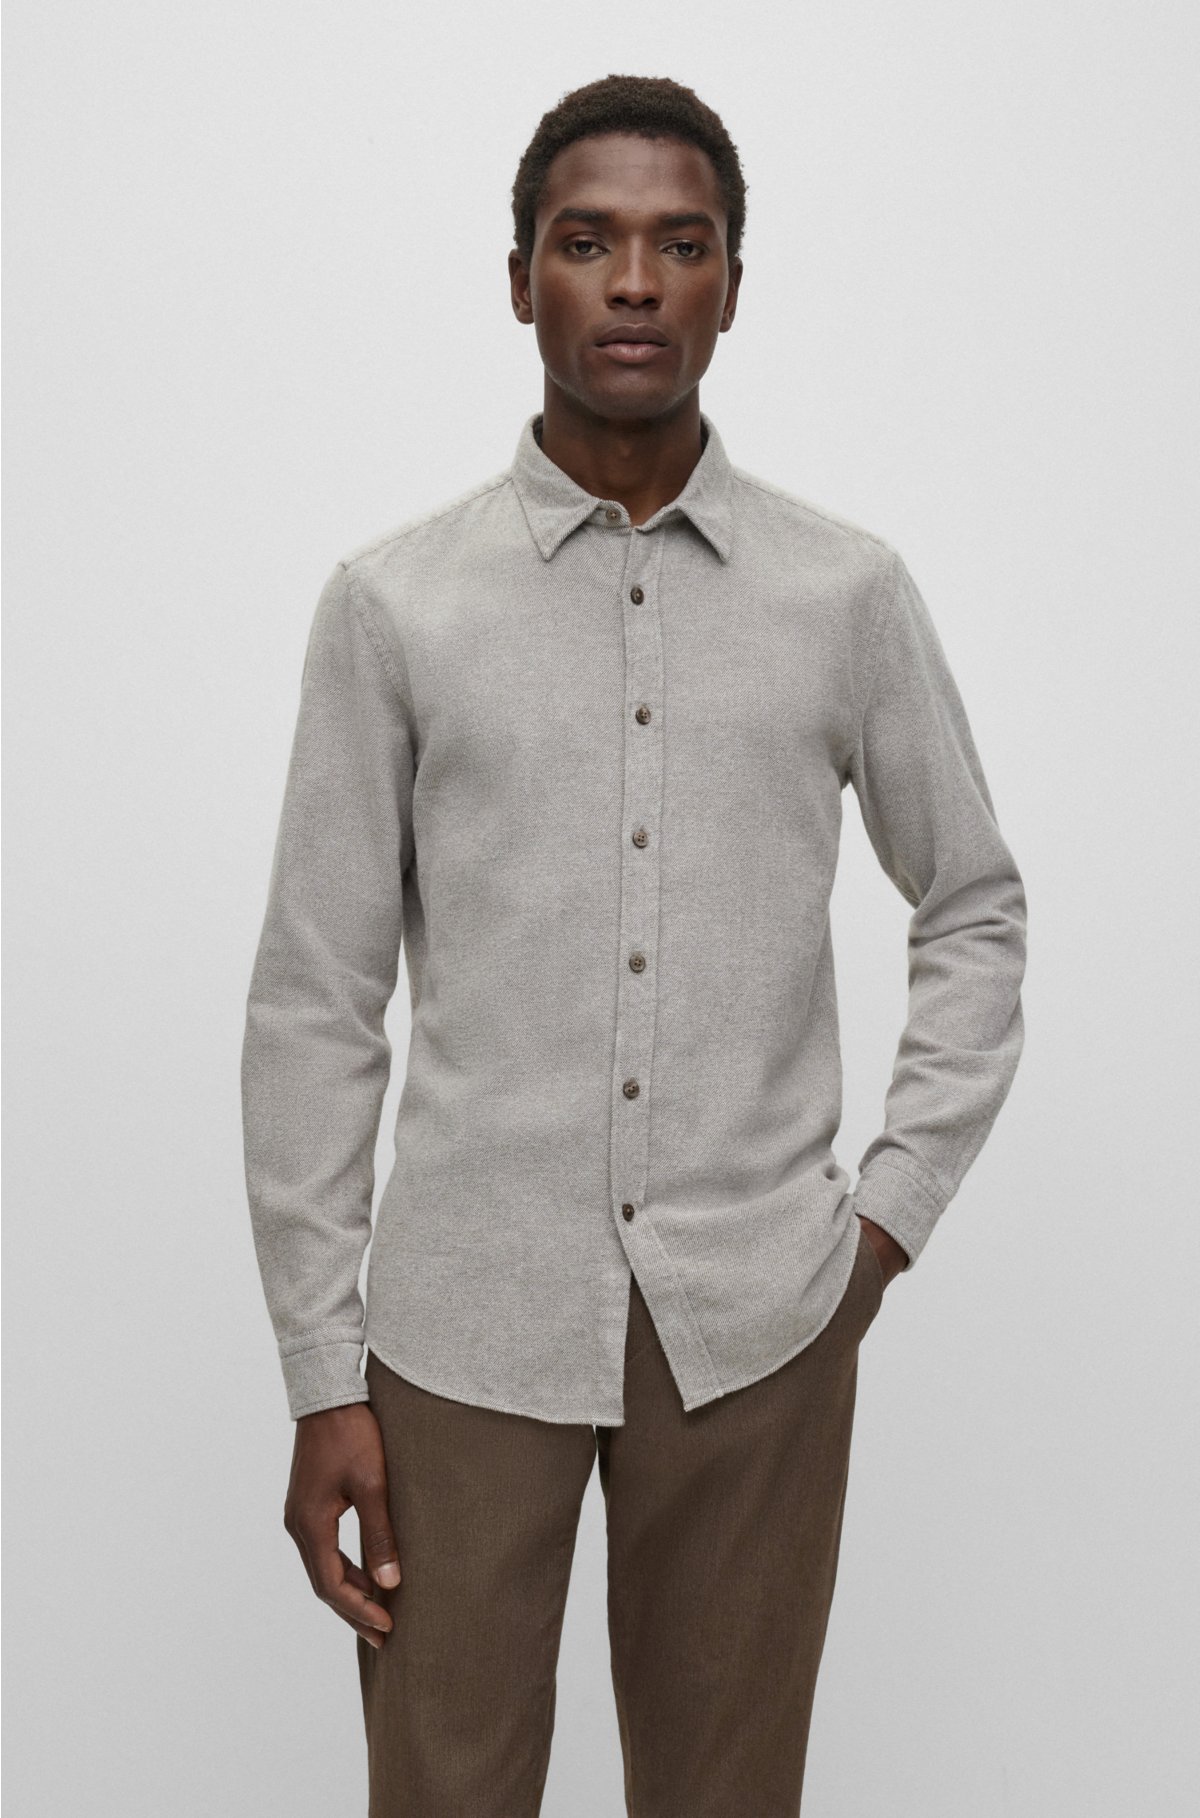 Long-Sleeved Regular Shirt With Placed Graphic - Ready to Wear